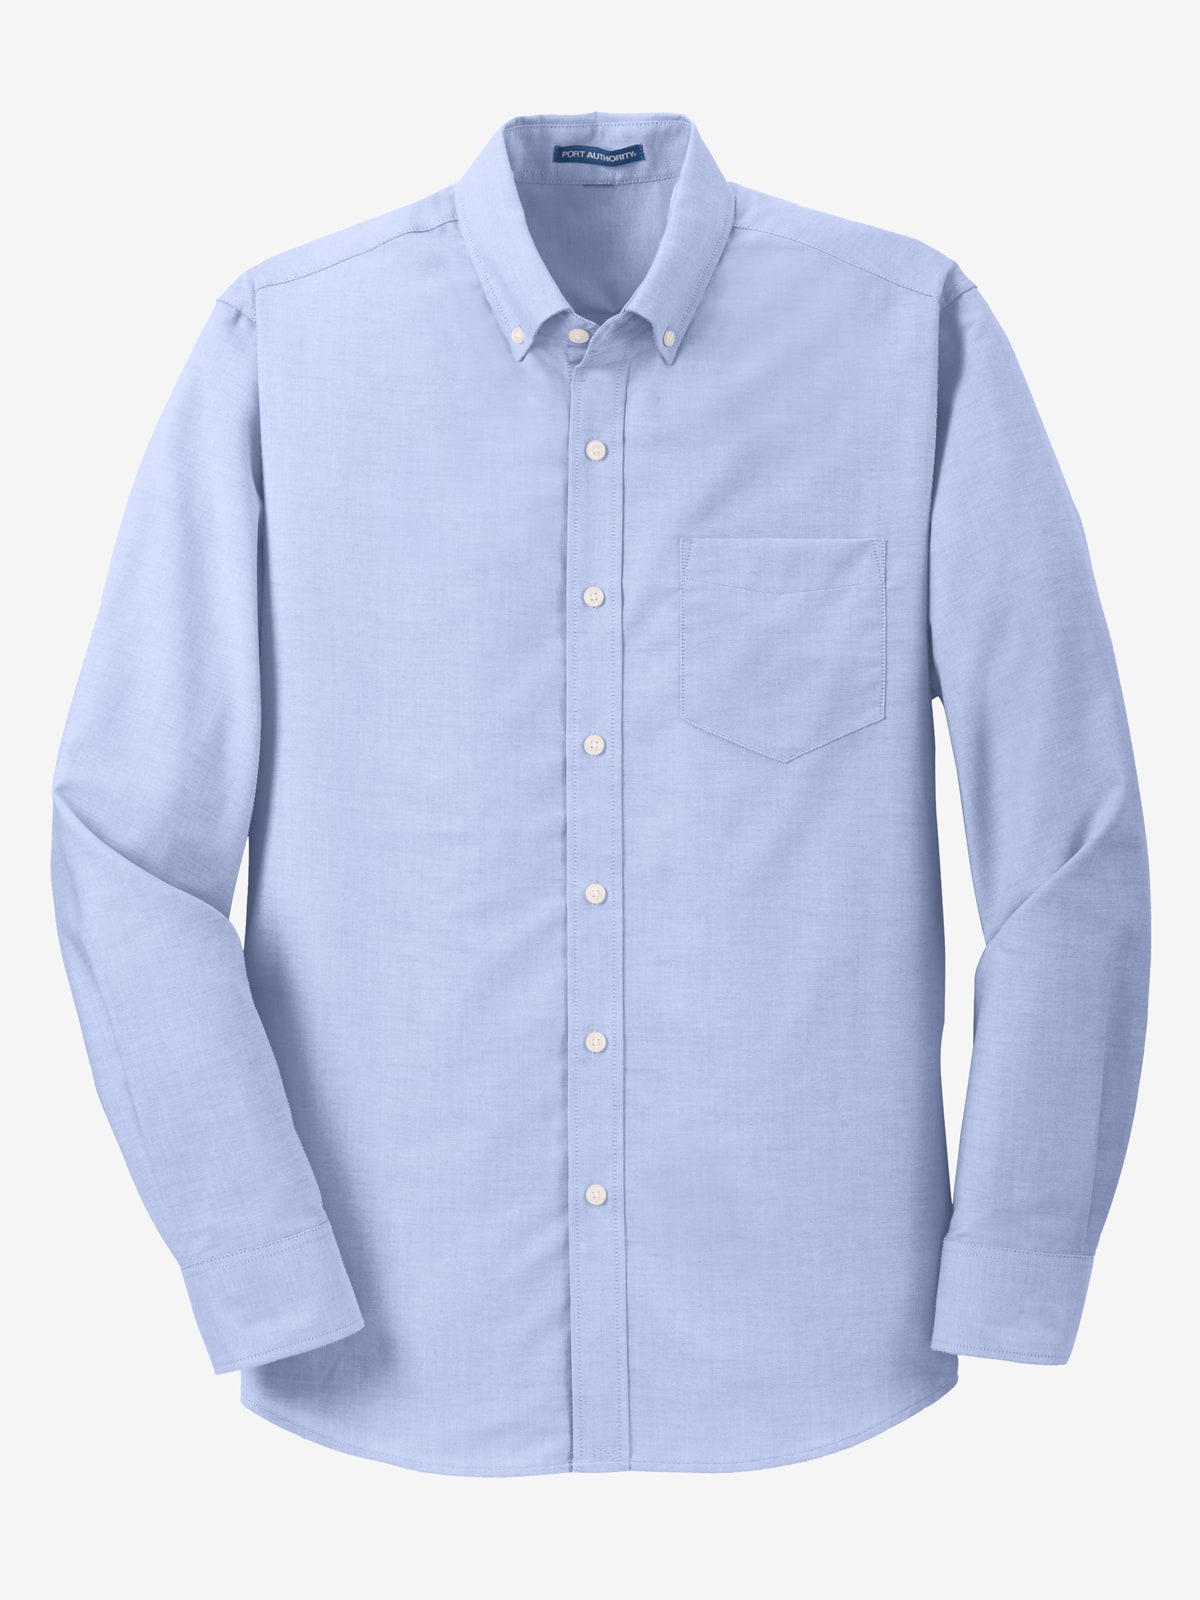 Insect Shield Men's Wrinkle Resistant Oxford Shirt